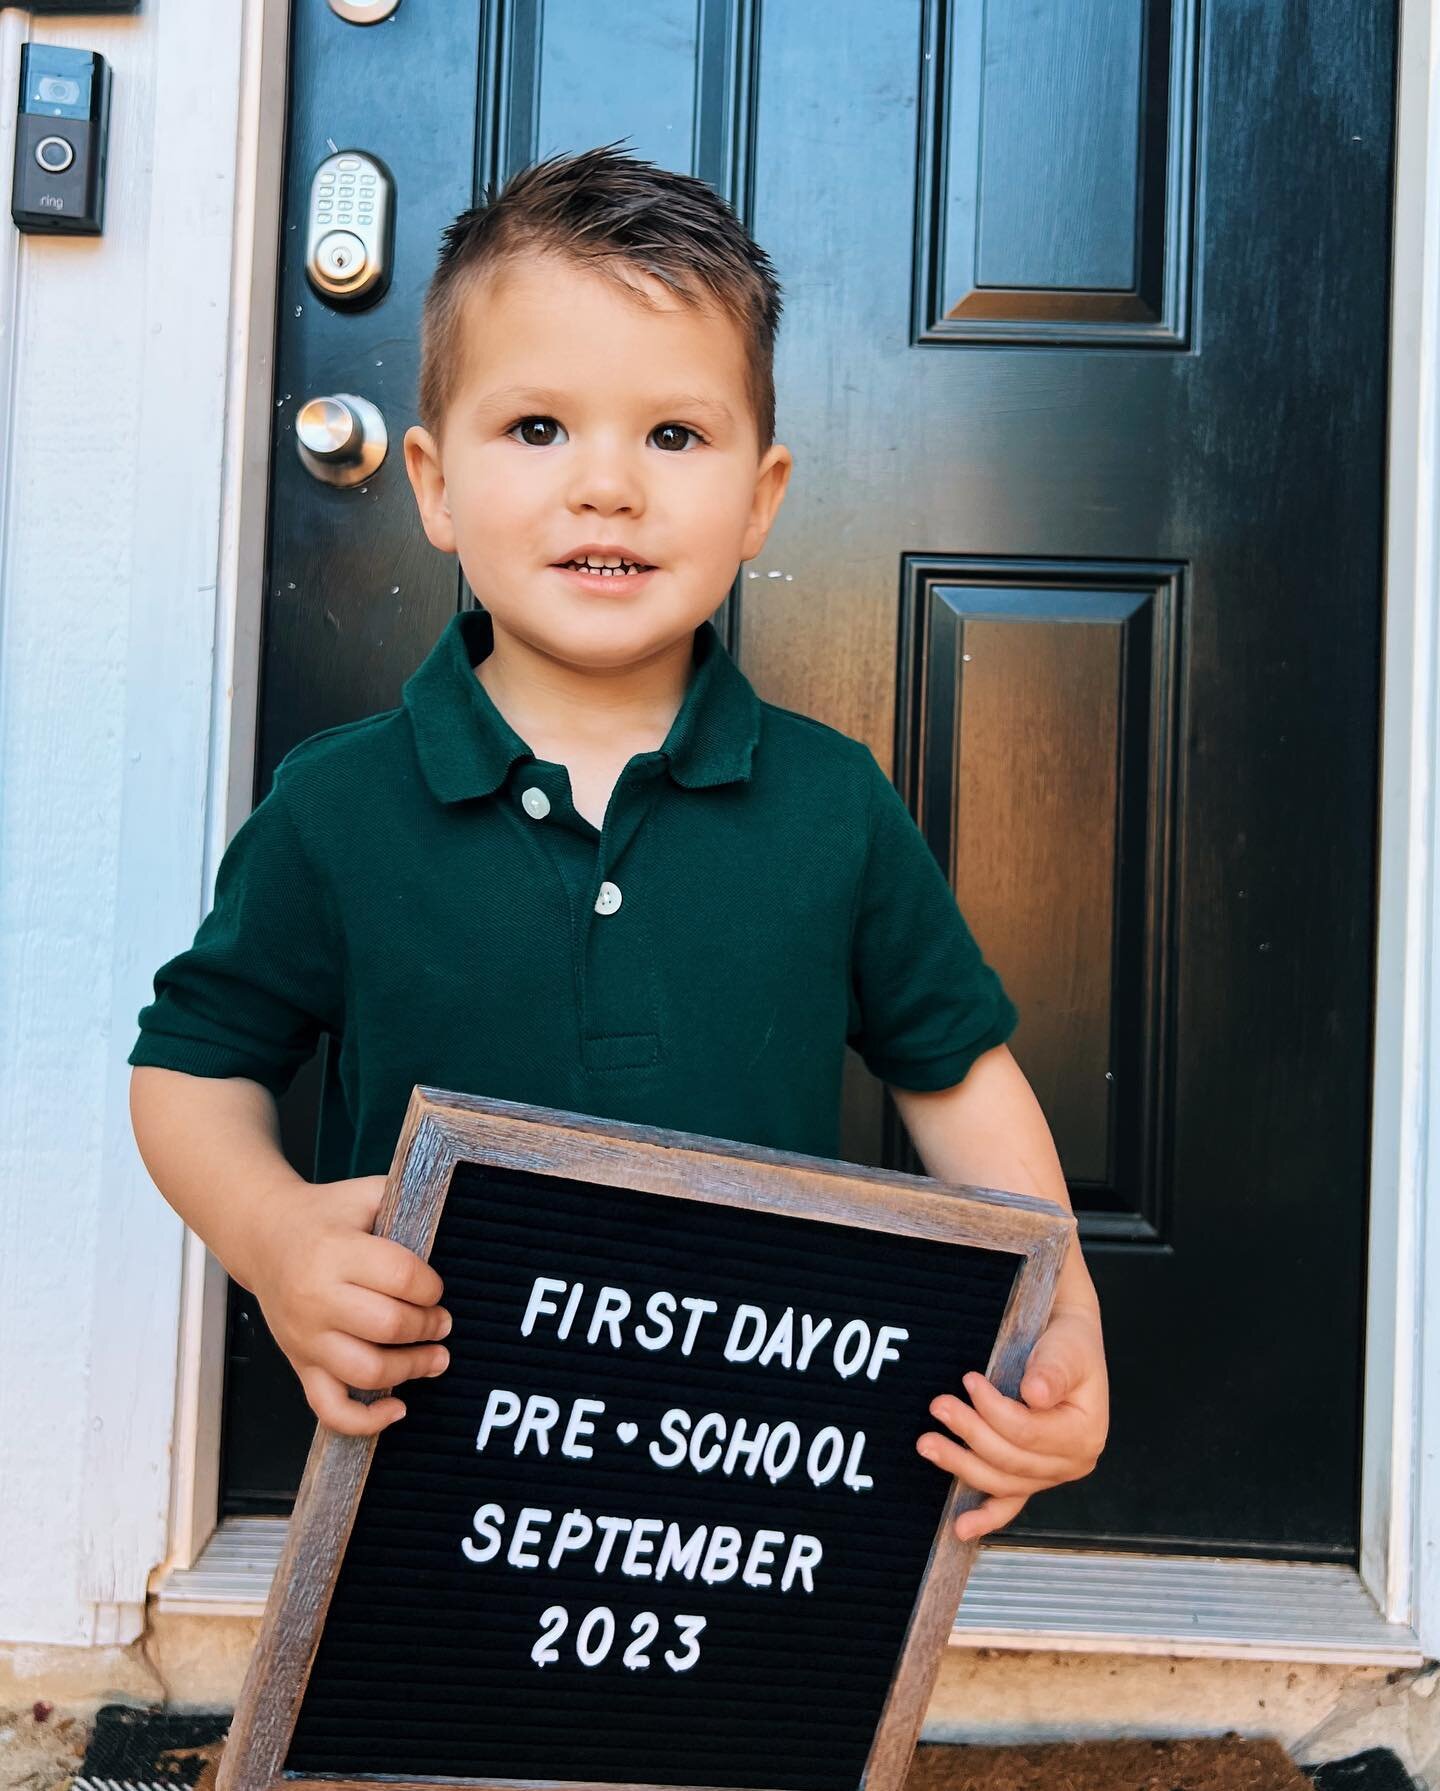 Sawyer&rsquo;s first day of pre-school📚🏃🏻🍂